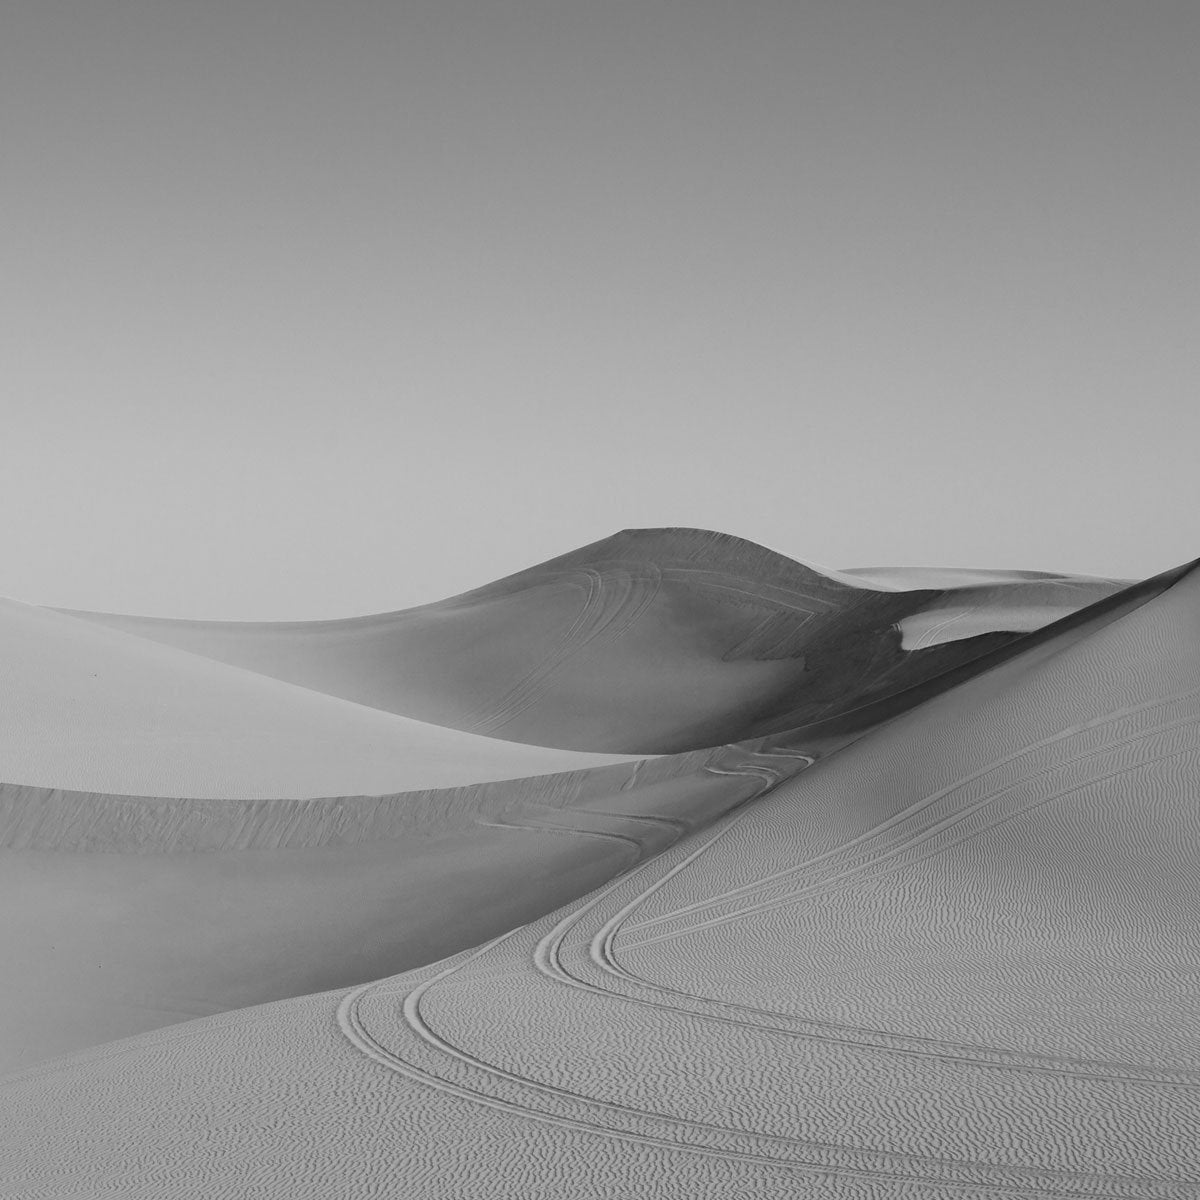 The Imperial Sand Dunes, California by Carol M. Highsmith